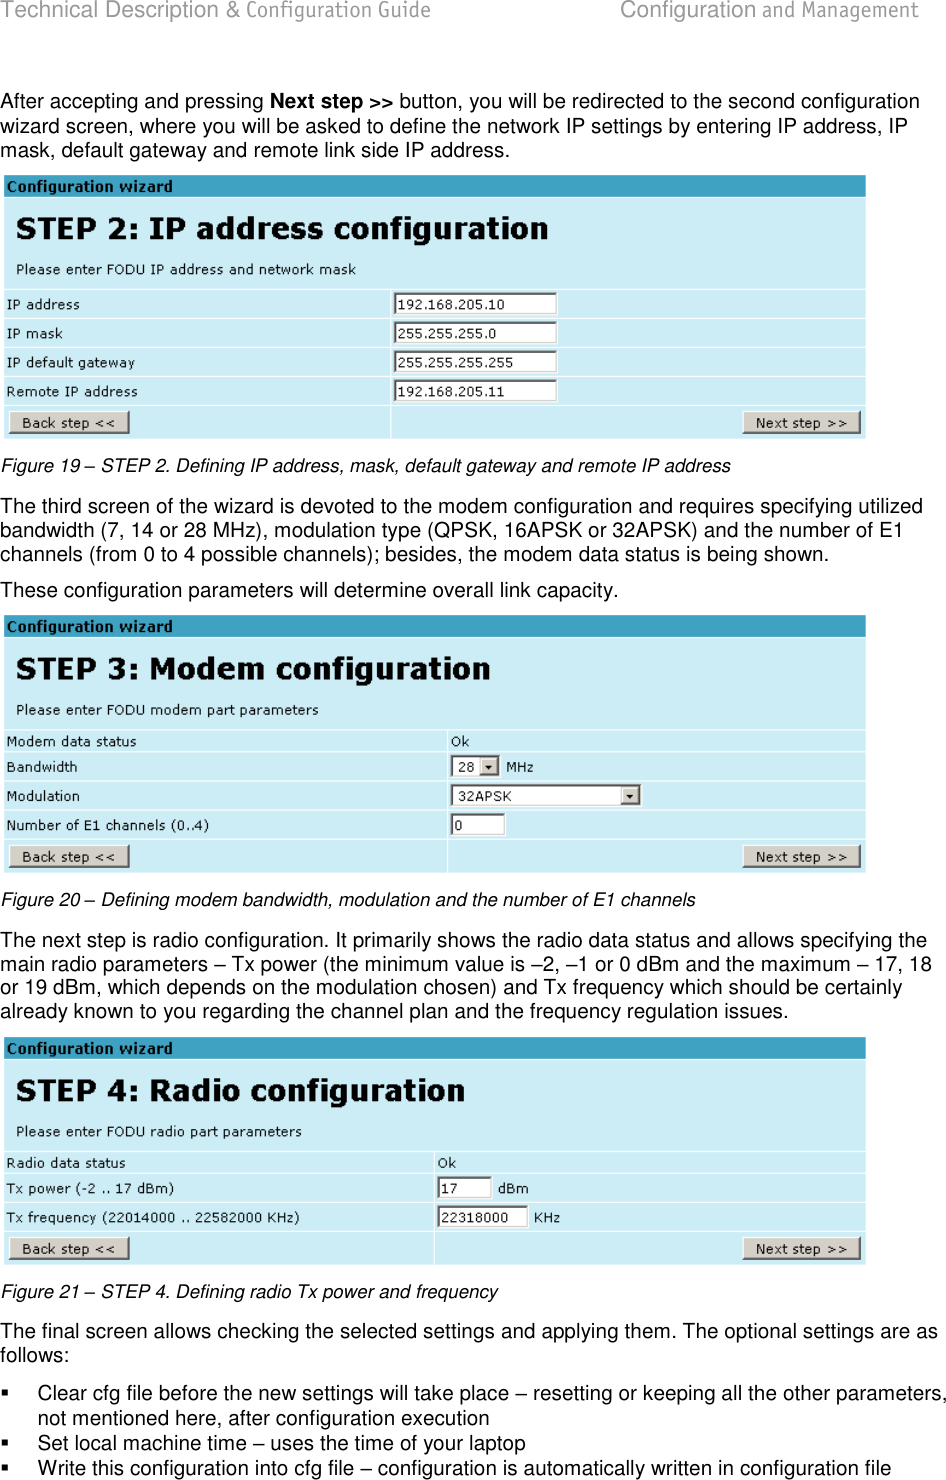 Technical Description &amp; Configuration Guide  Configuration and Management  LigoWave  Page 26 After accepting and pressing Next step &gt;&gt; button, you will be redirected to the second configuration wizard screen, where you will be asked to define the network IP settings by entering IP address, IP mask, default gateway and remote link side IP address.  Figure 19 – STEP 2. Defining IP address, mask, default gateway and remote IP address The third screen of the wizard is devoted to the modem configuration and requires specifying utilized bandwidth (7, 14 or 28 MHz), modulation type (QPSK, 16APSK or 32APSK) and the number of E1 channels (from 0 to 4 possible channels); besides, the modem data status is being shown. These configuration parameters will determine overall link capacity.  Figure 20 – Defining modem bandwidth, modulation and the number of E1 channels The next step is radio configuration. It primarily shows the radio data status and allows specifying the main radio parameters  Tx power (the minimum value is 2, 1 or 0 dBm and the maximum  17, 18 or 19 dBm, which depends on the modulation chosen) and Tx frequency which should be certainly already known to you regarding the channel plan and the frequency regulation issues.  Figure 21 – STEP 4. Defining radio Tx power and frequency The final screen allows checking the selected settings and applying them. The optional settings are as follows:   Clear cfg file before the new settings will take place  resetting or keeping all the other parameters, not mentioned here, after configuration execution   Set local machine time  uses the time of your laptop   Write this configuration into cfg file  configuration is automatically written in configuration file 